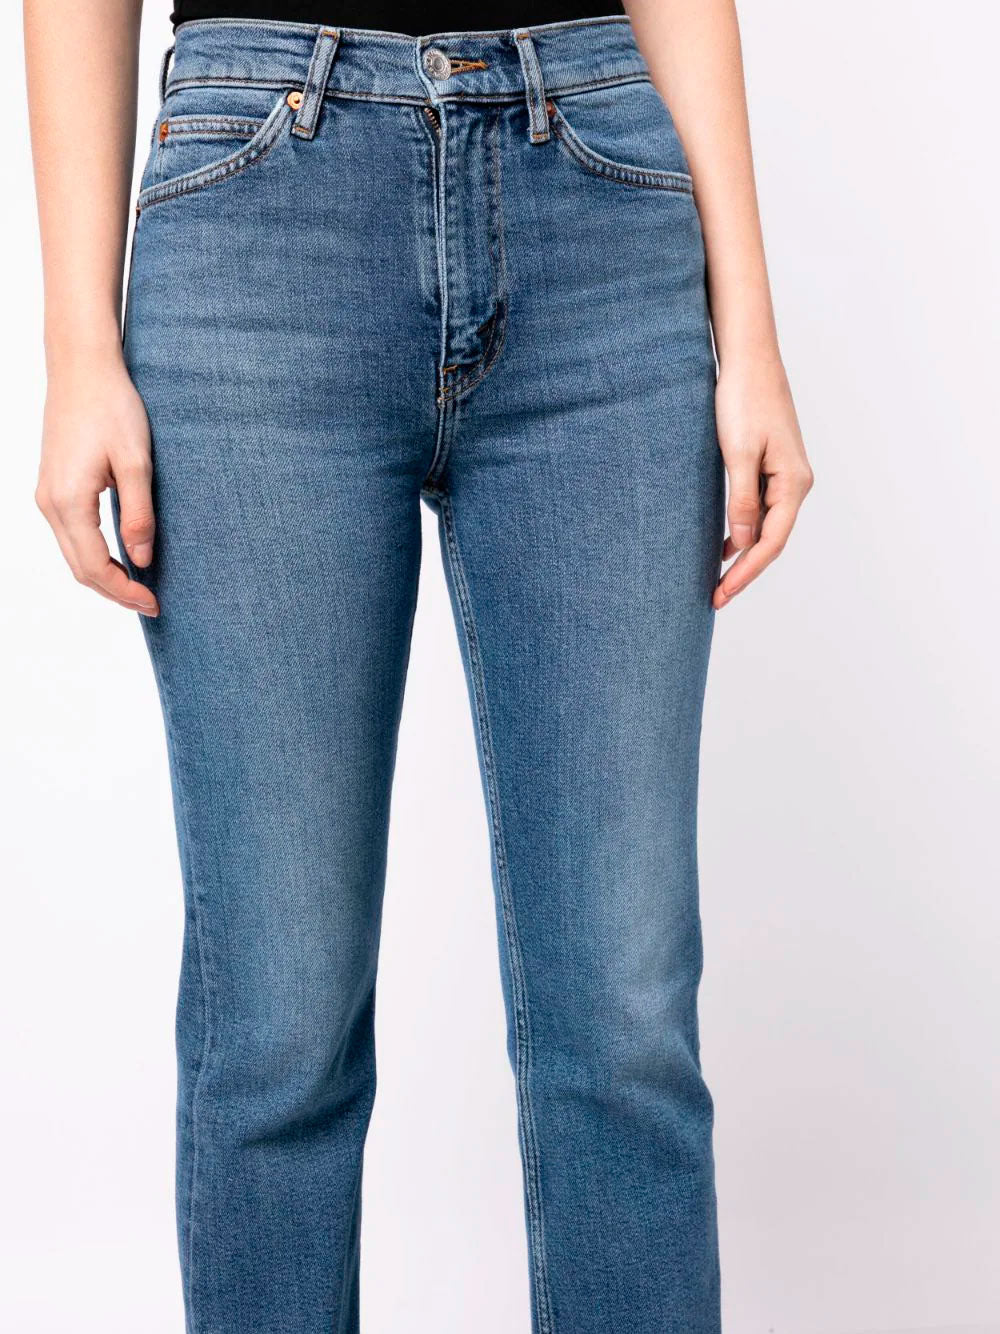 70s Crop Boot jeans